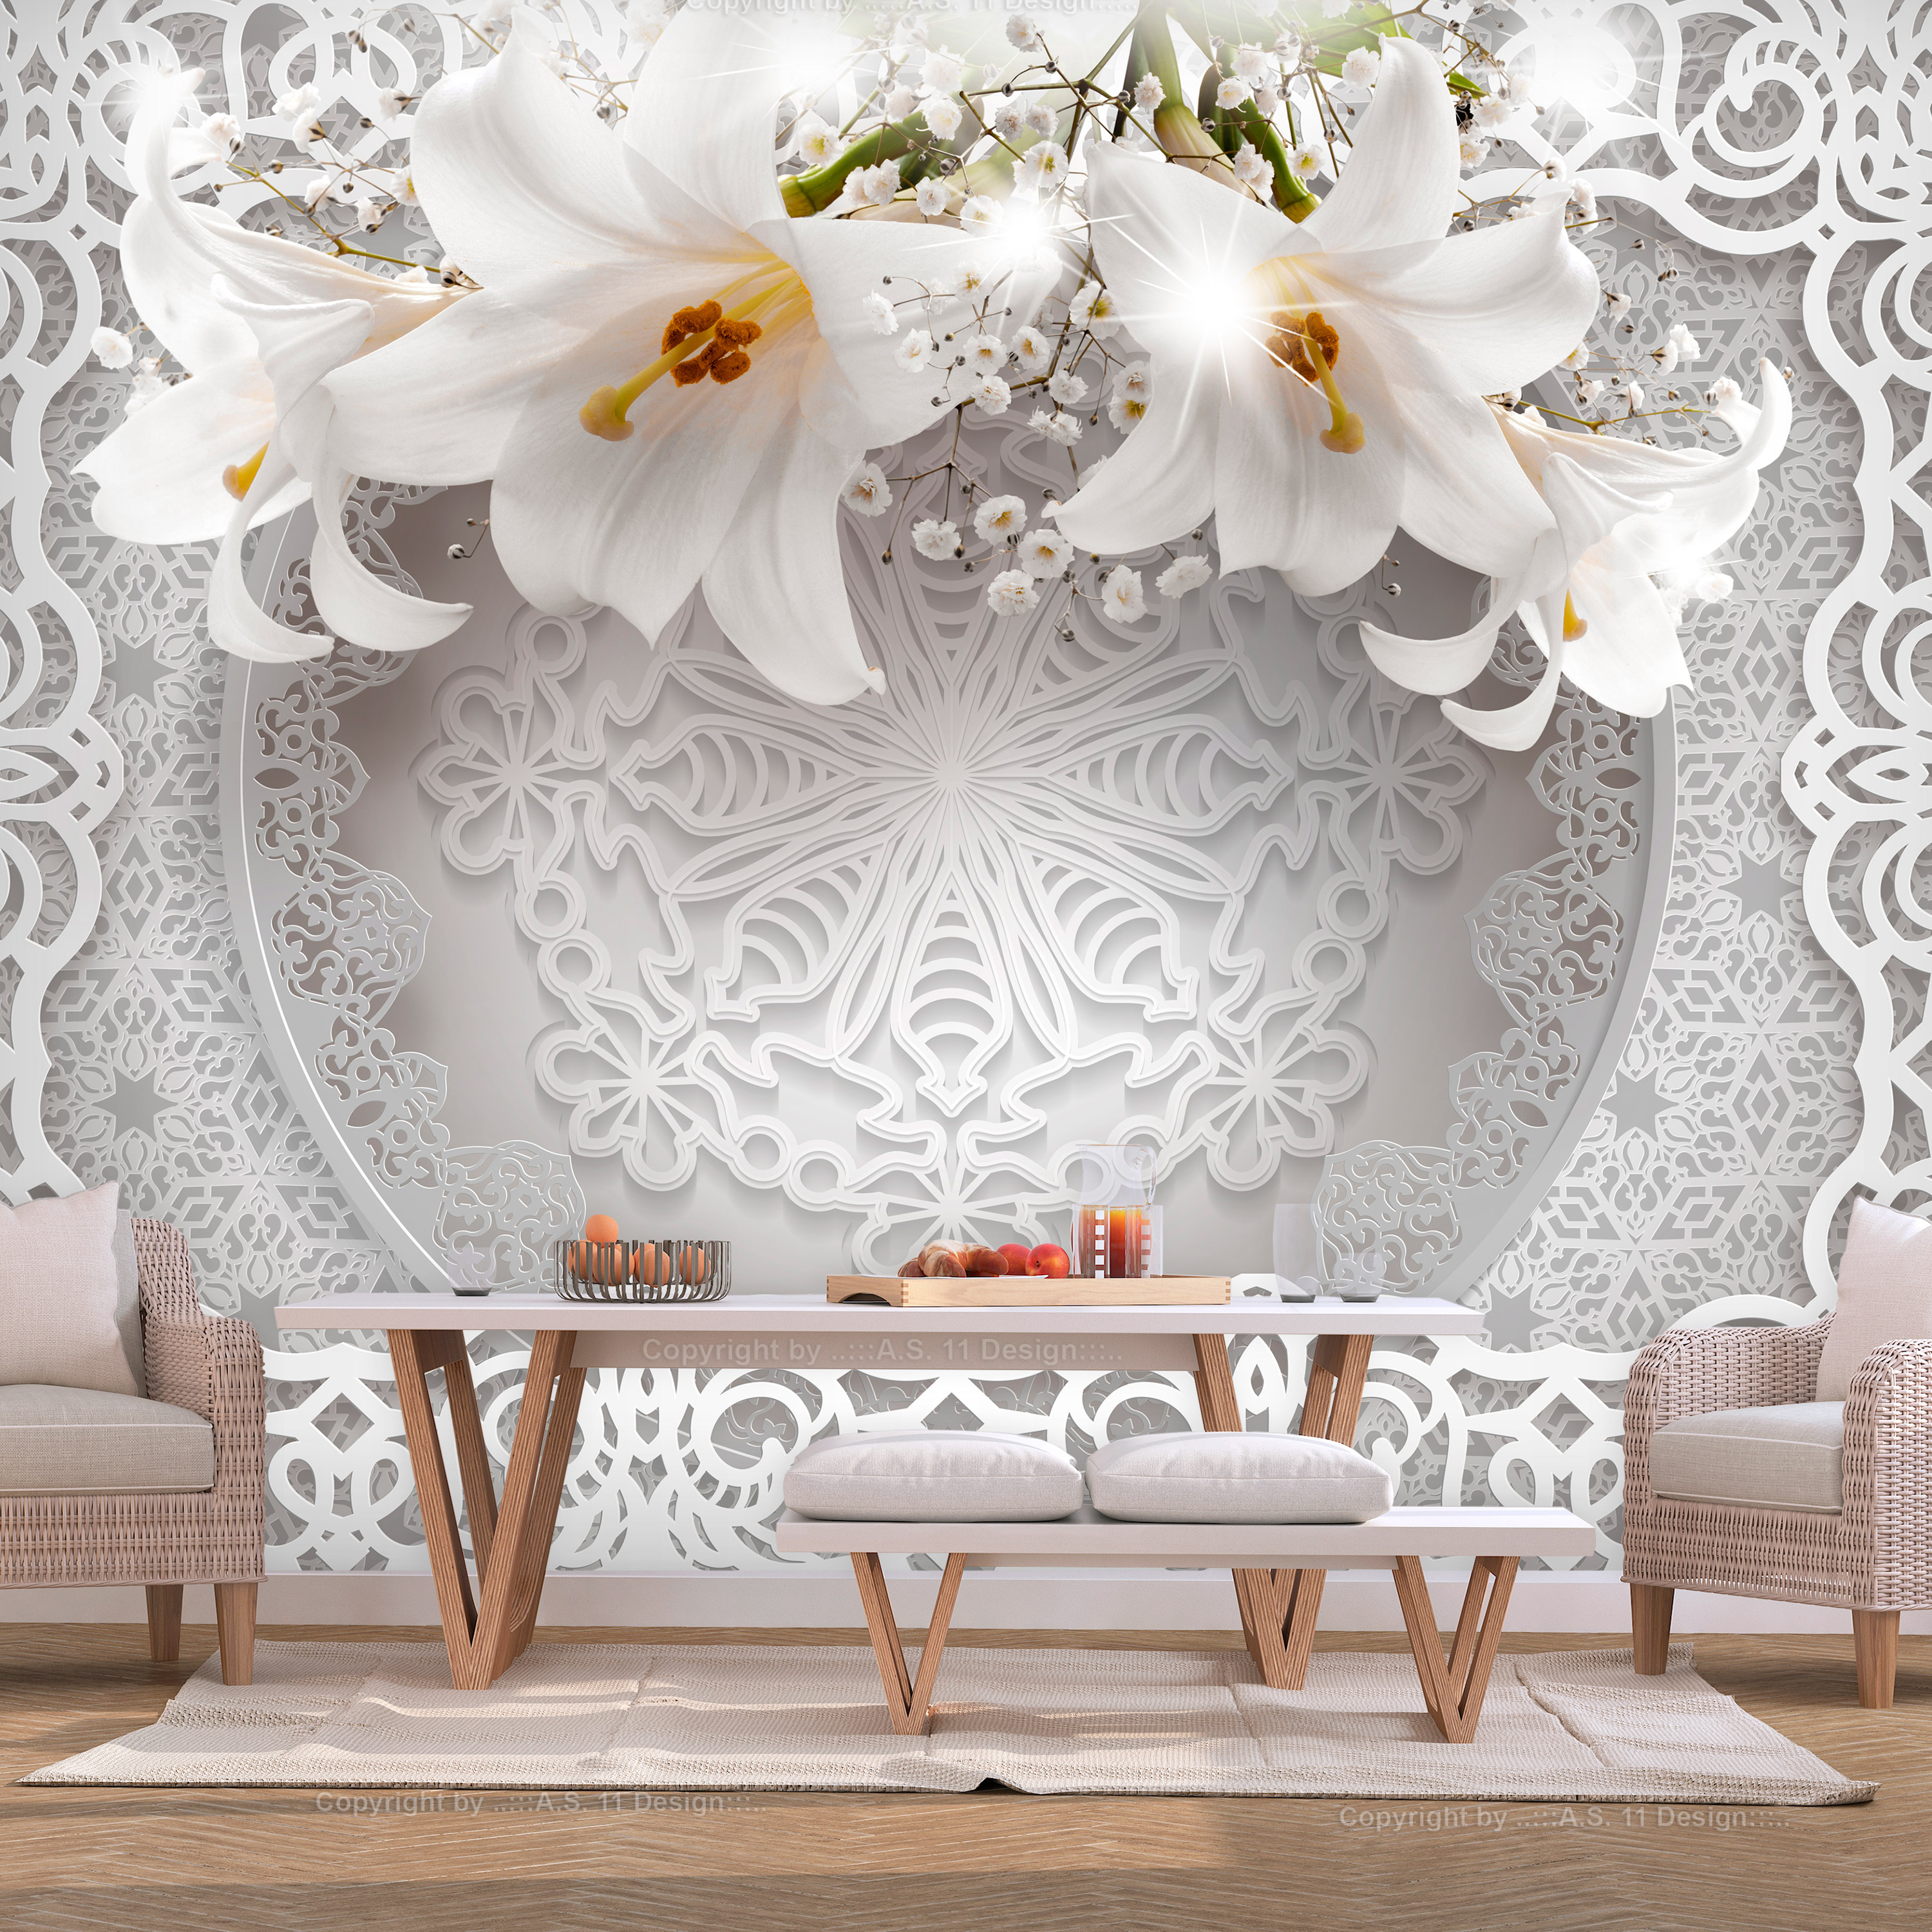 Self-adhesive Wallpaper - Lilies and Ornaments - 98x70